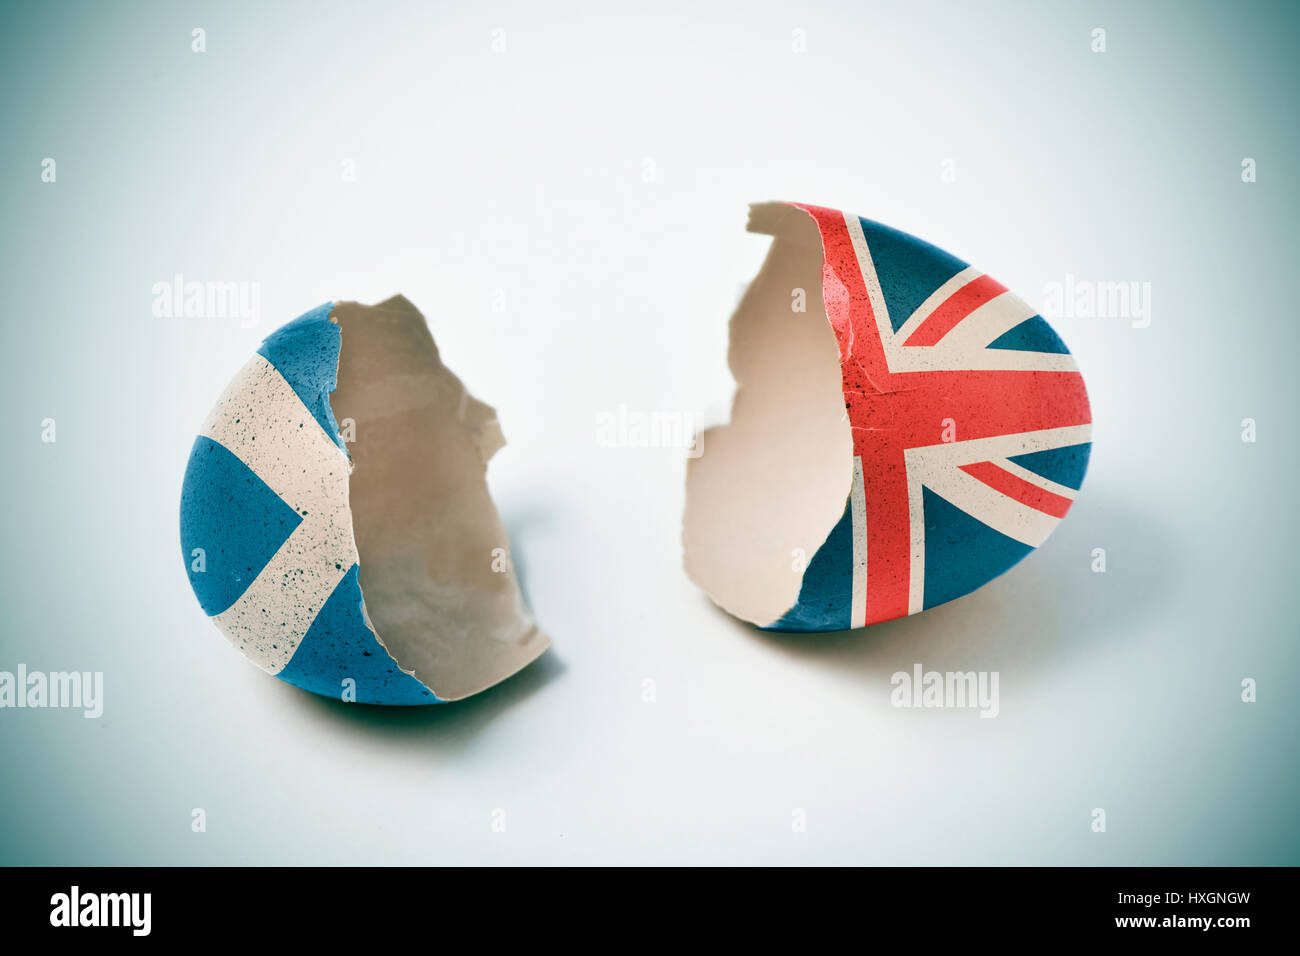 the two halves of a cracked eggshell, one patterned with the flag of Scotland and the other one patterned with the flag of United Kingdom Stock Photo